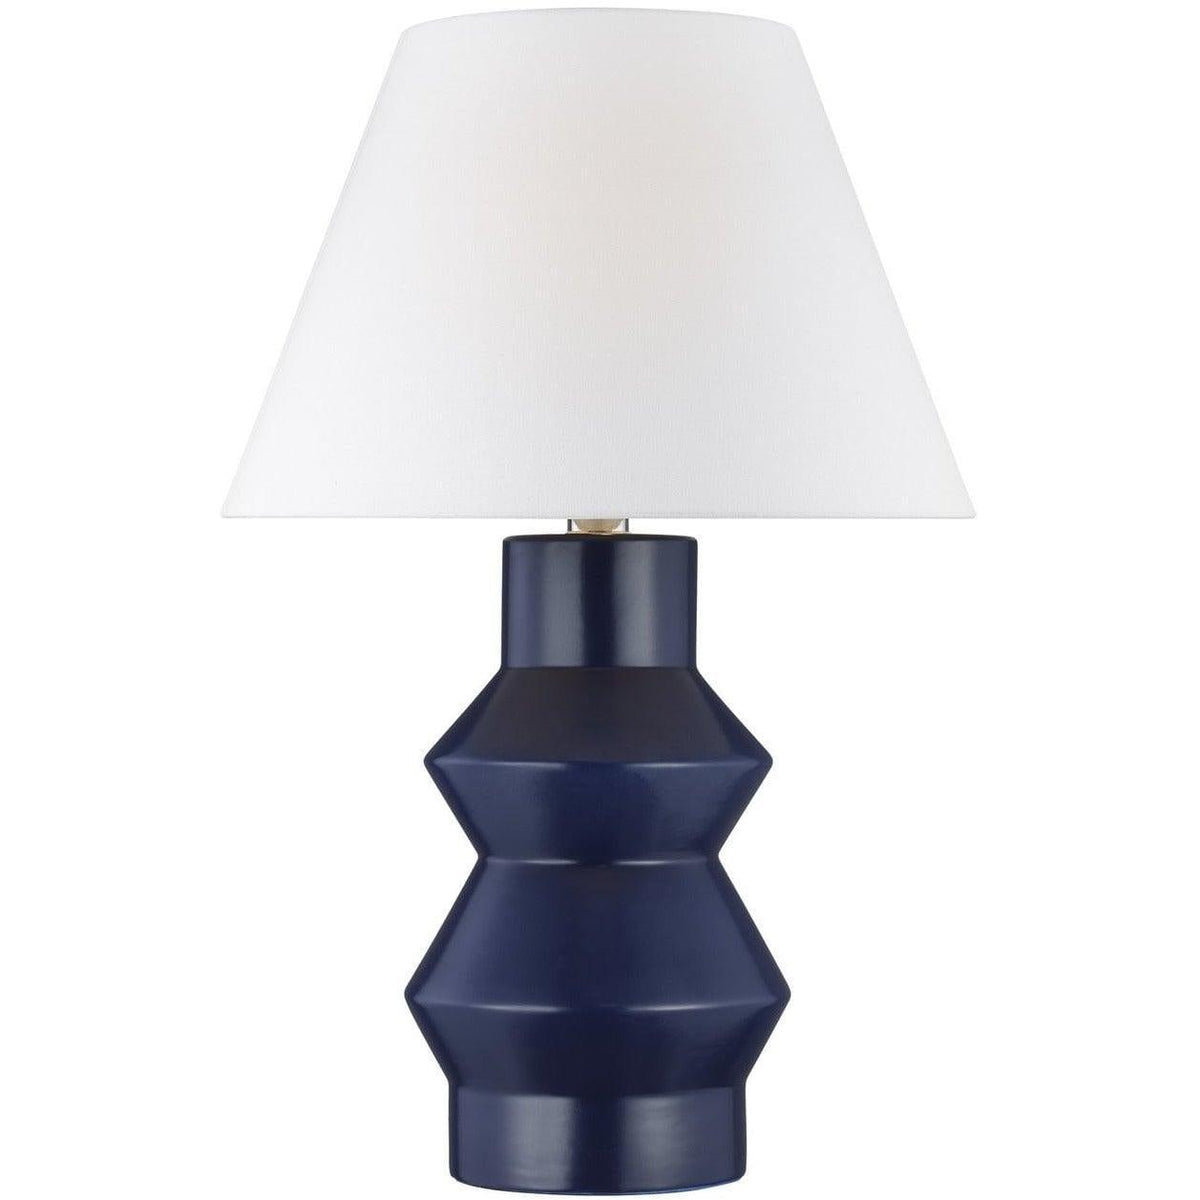 Visual Comfort Studio Collection - Abaco Large Table Lamp - CT1041INDPN1 | Montreal Lighting & Hardware